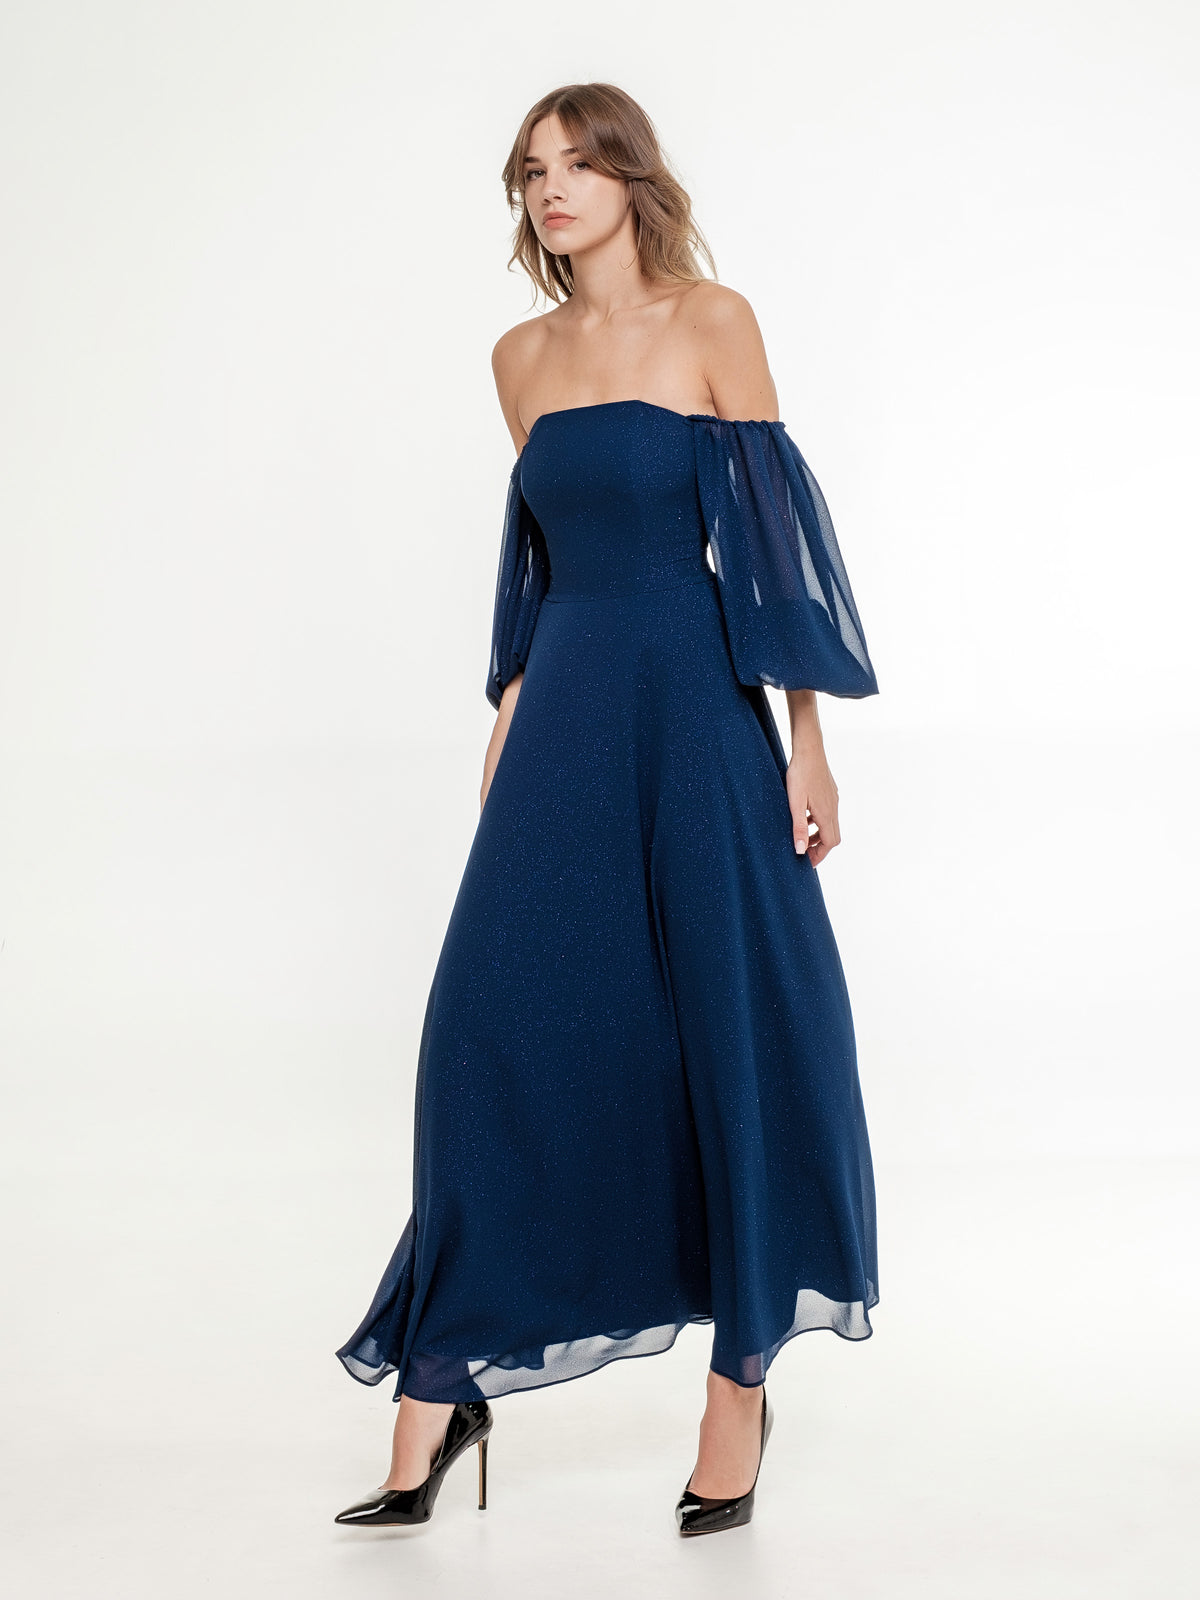 dark marine blue long dress with corset top part open neck line tulle sleeves